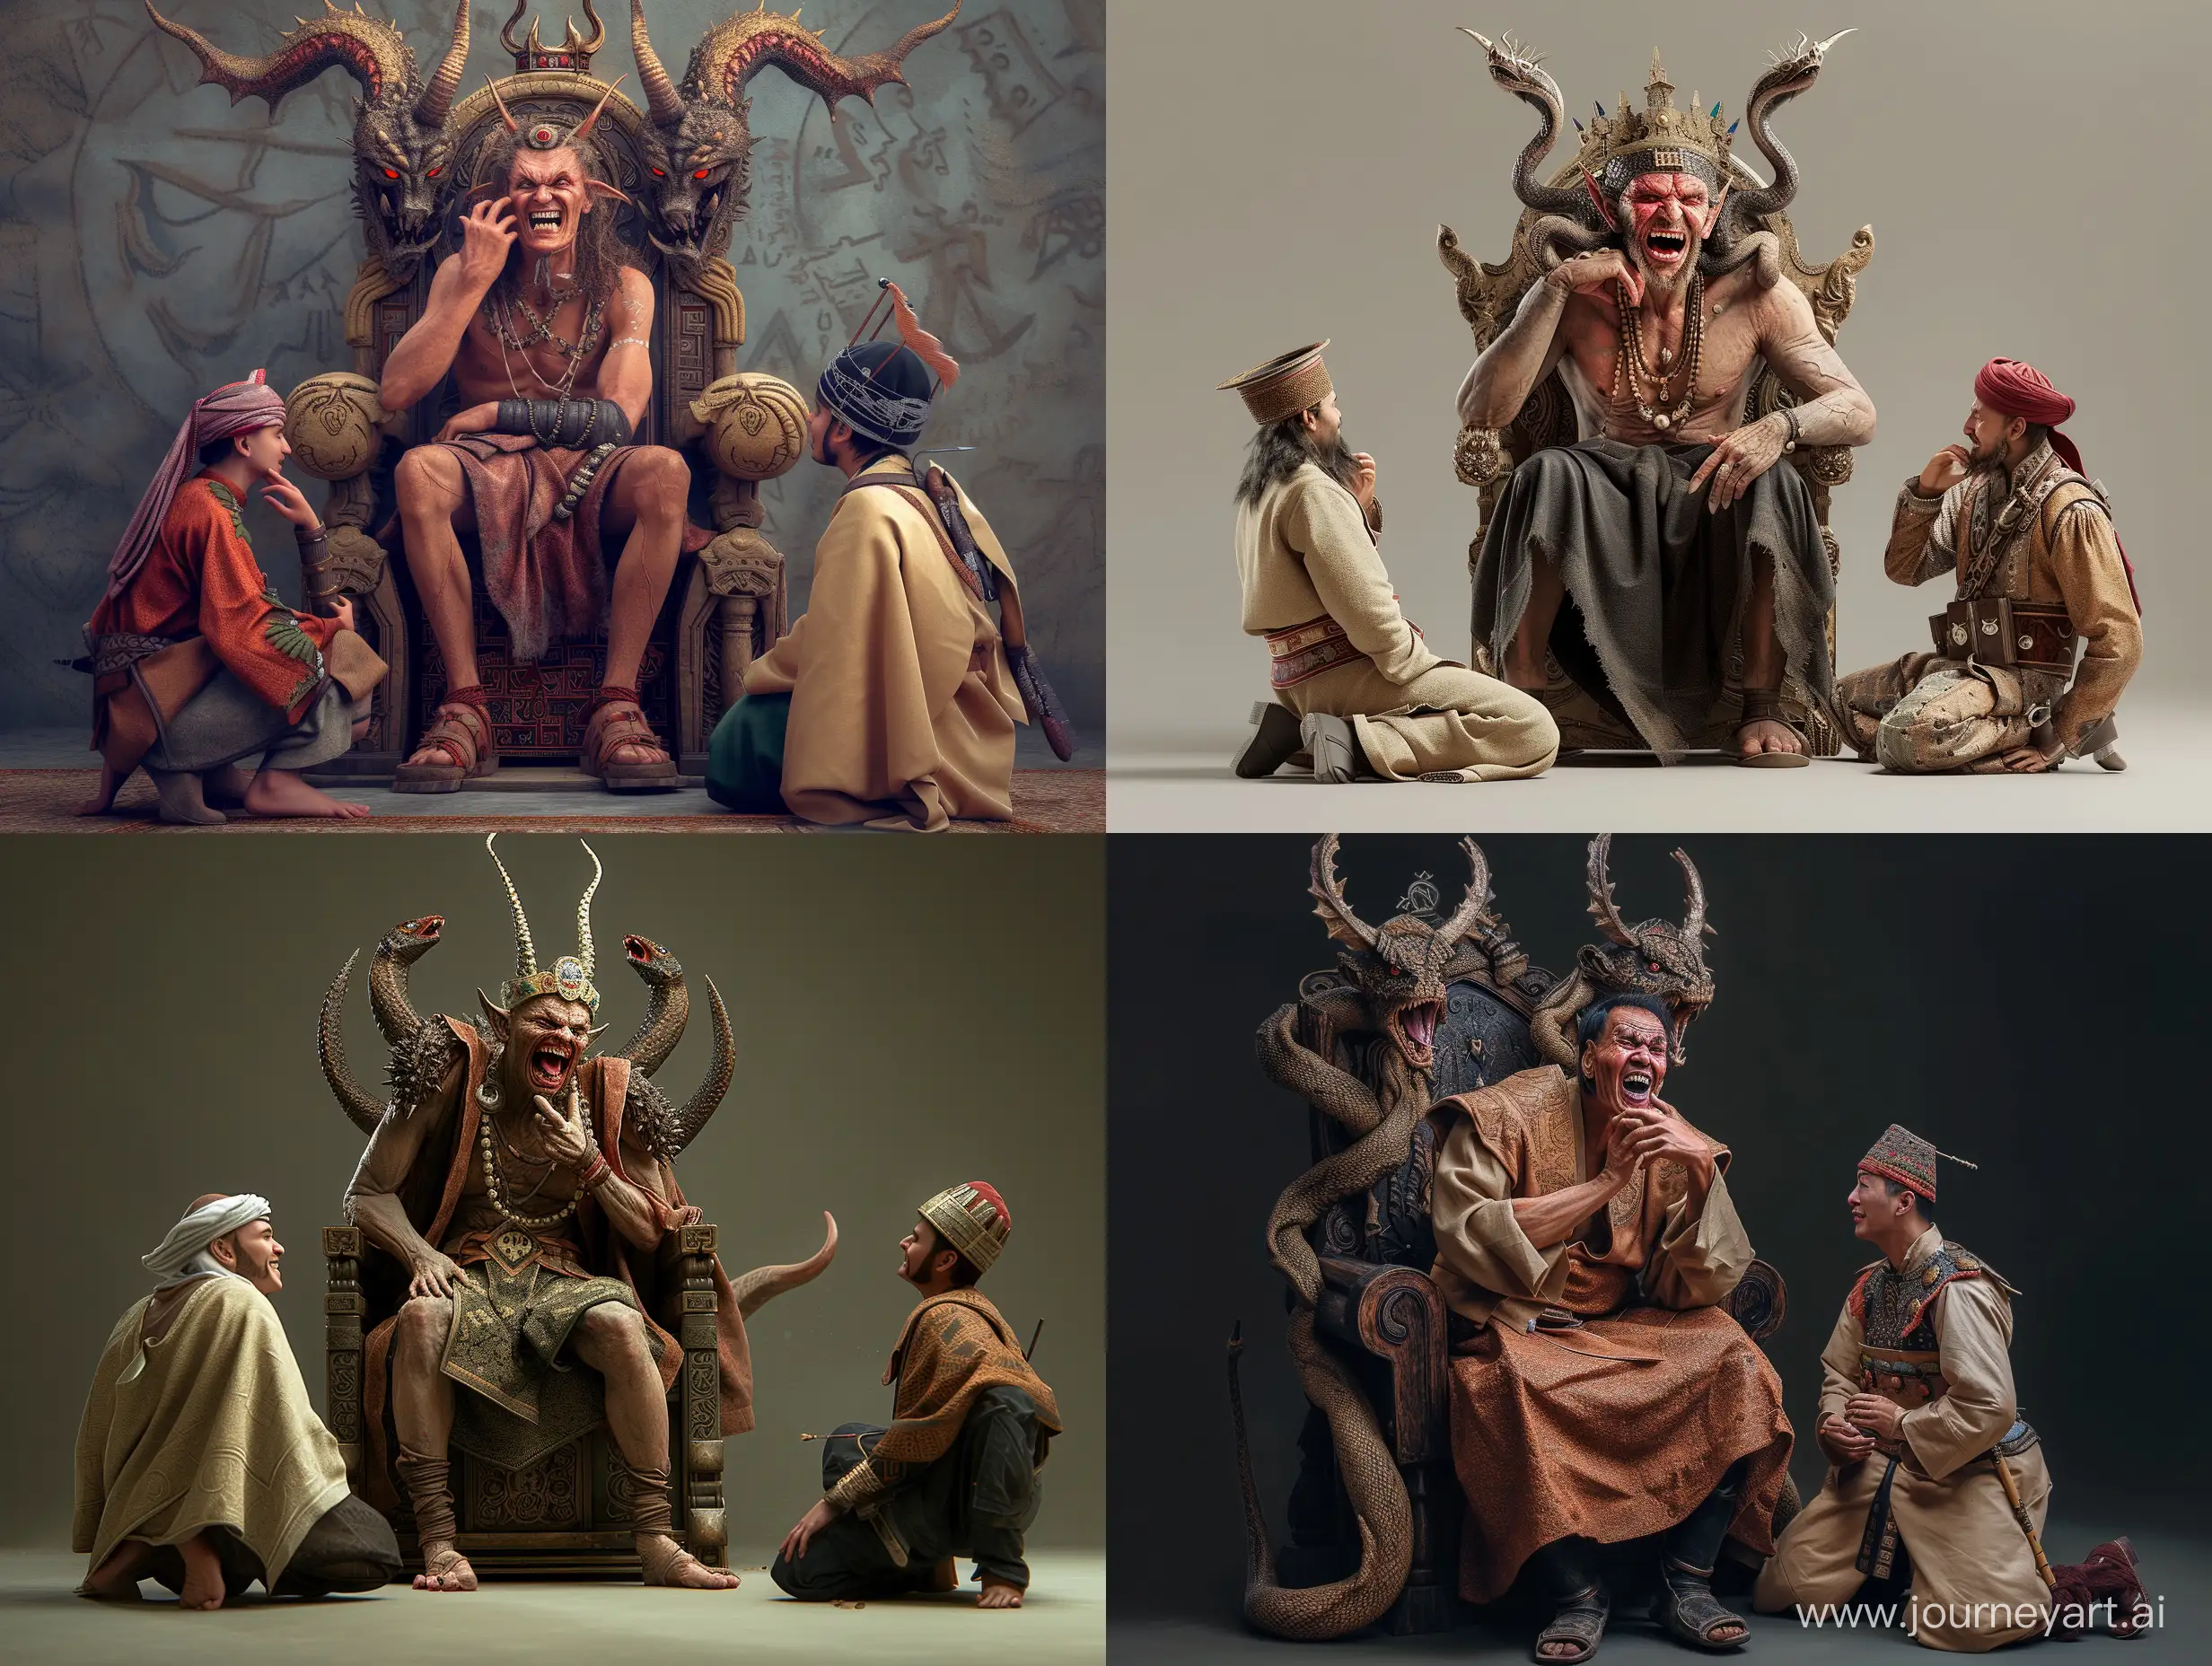 Sinister-Demon-King-on-Throne-with-Soldiers-in-Arabic-and-Mongolian-Attire